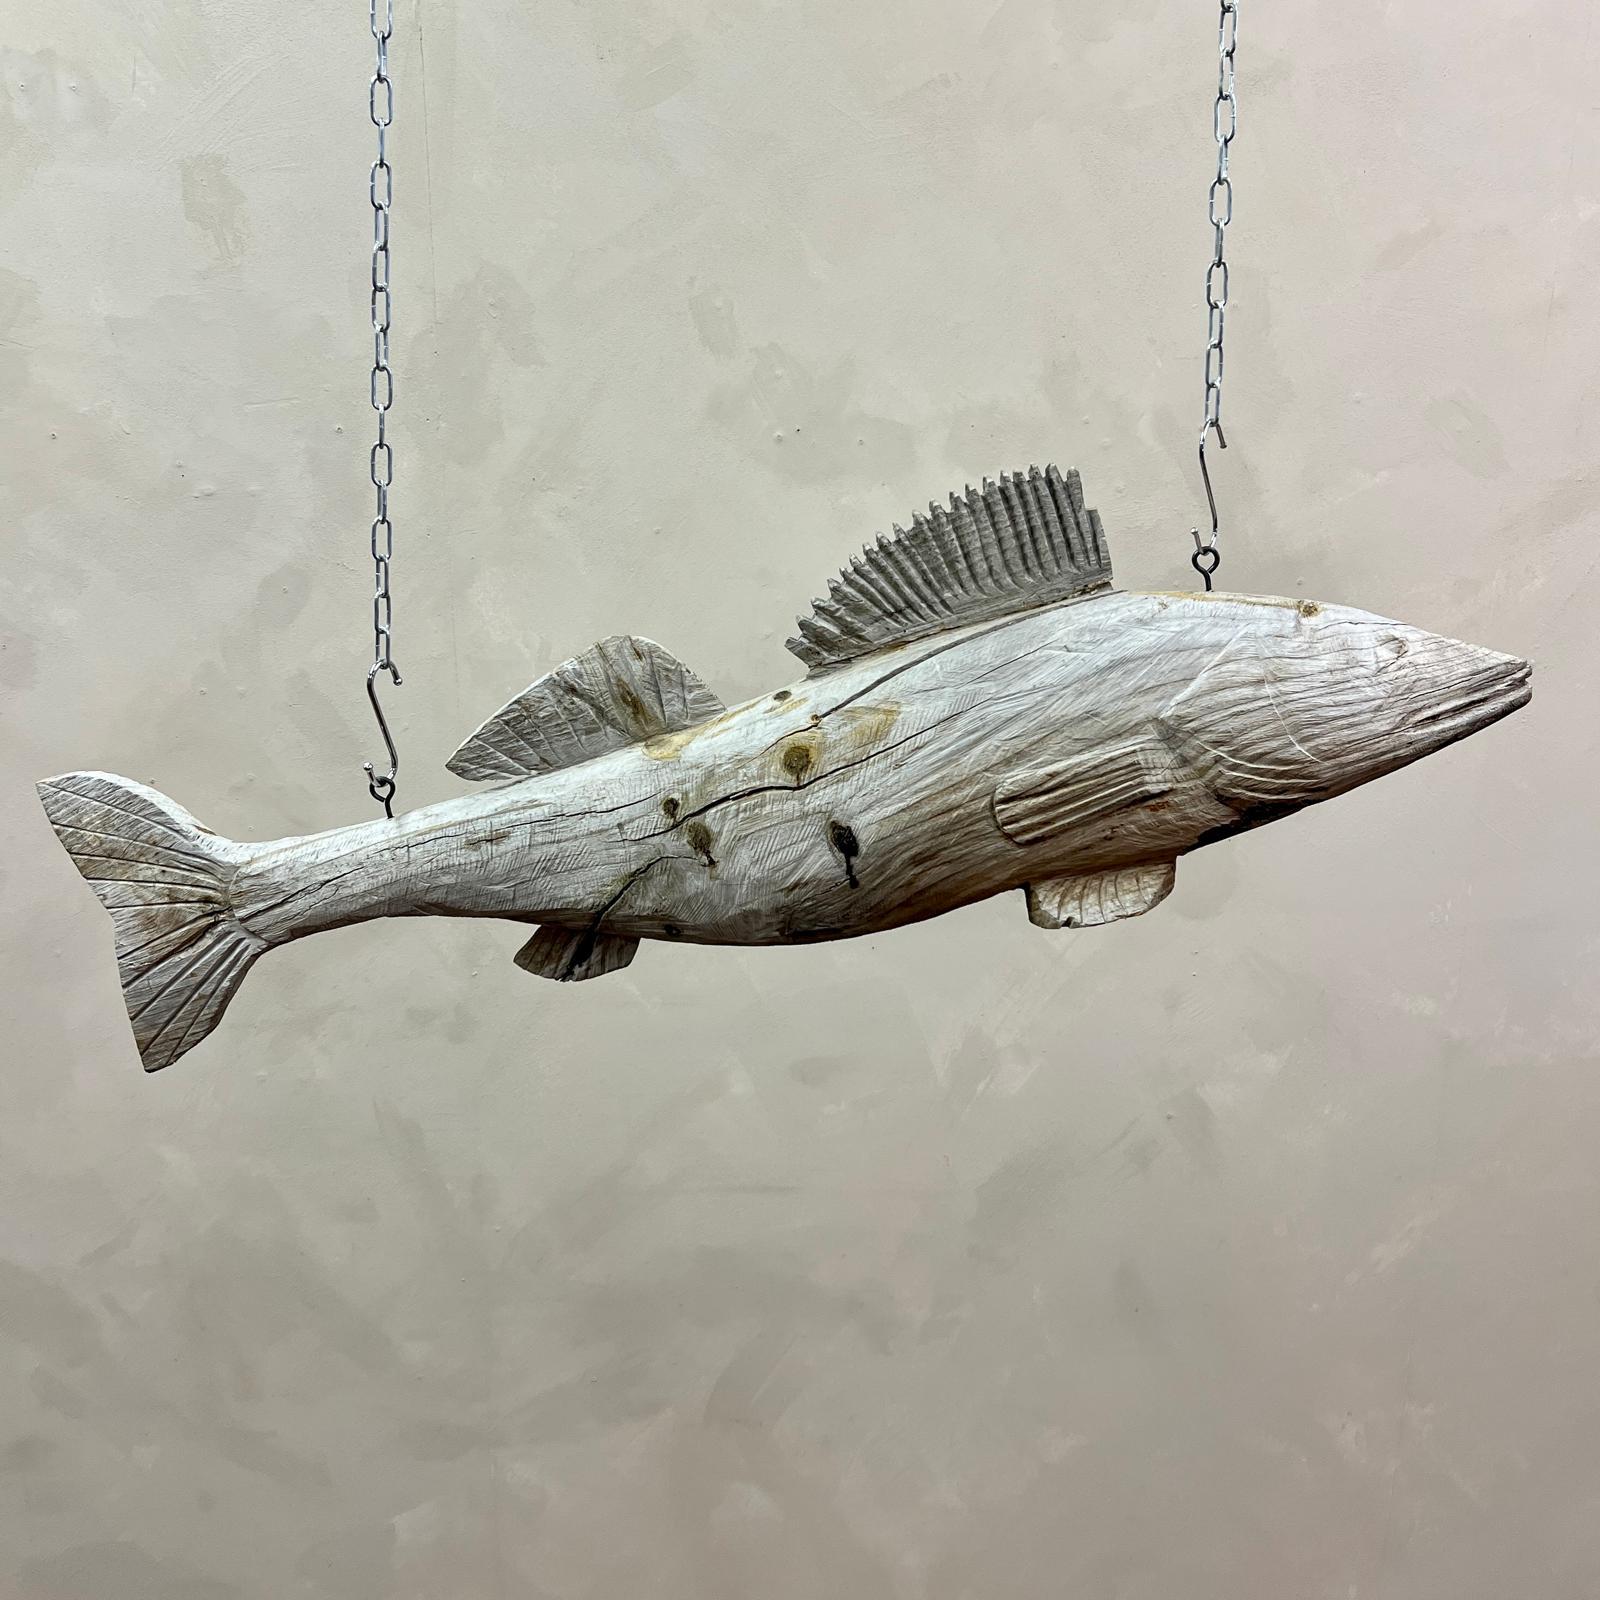 Large scal, fisherie trade sign. This hand carved Zander was hung in a local french village near Laval, advertising a local fisherie, then purchased 20 years ago by a local dealer and would now look great hung in the kitchen or restaurant.
Silvered,